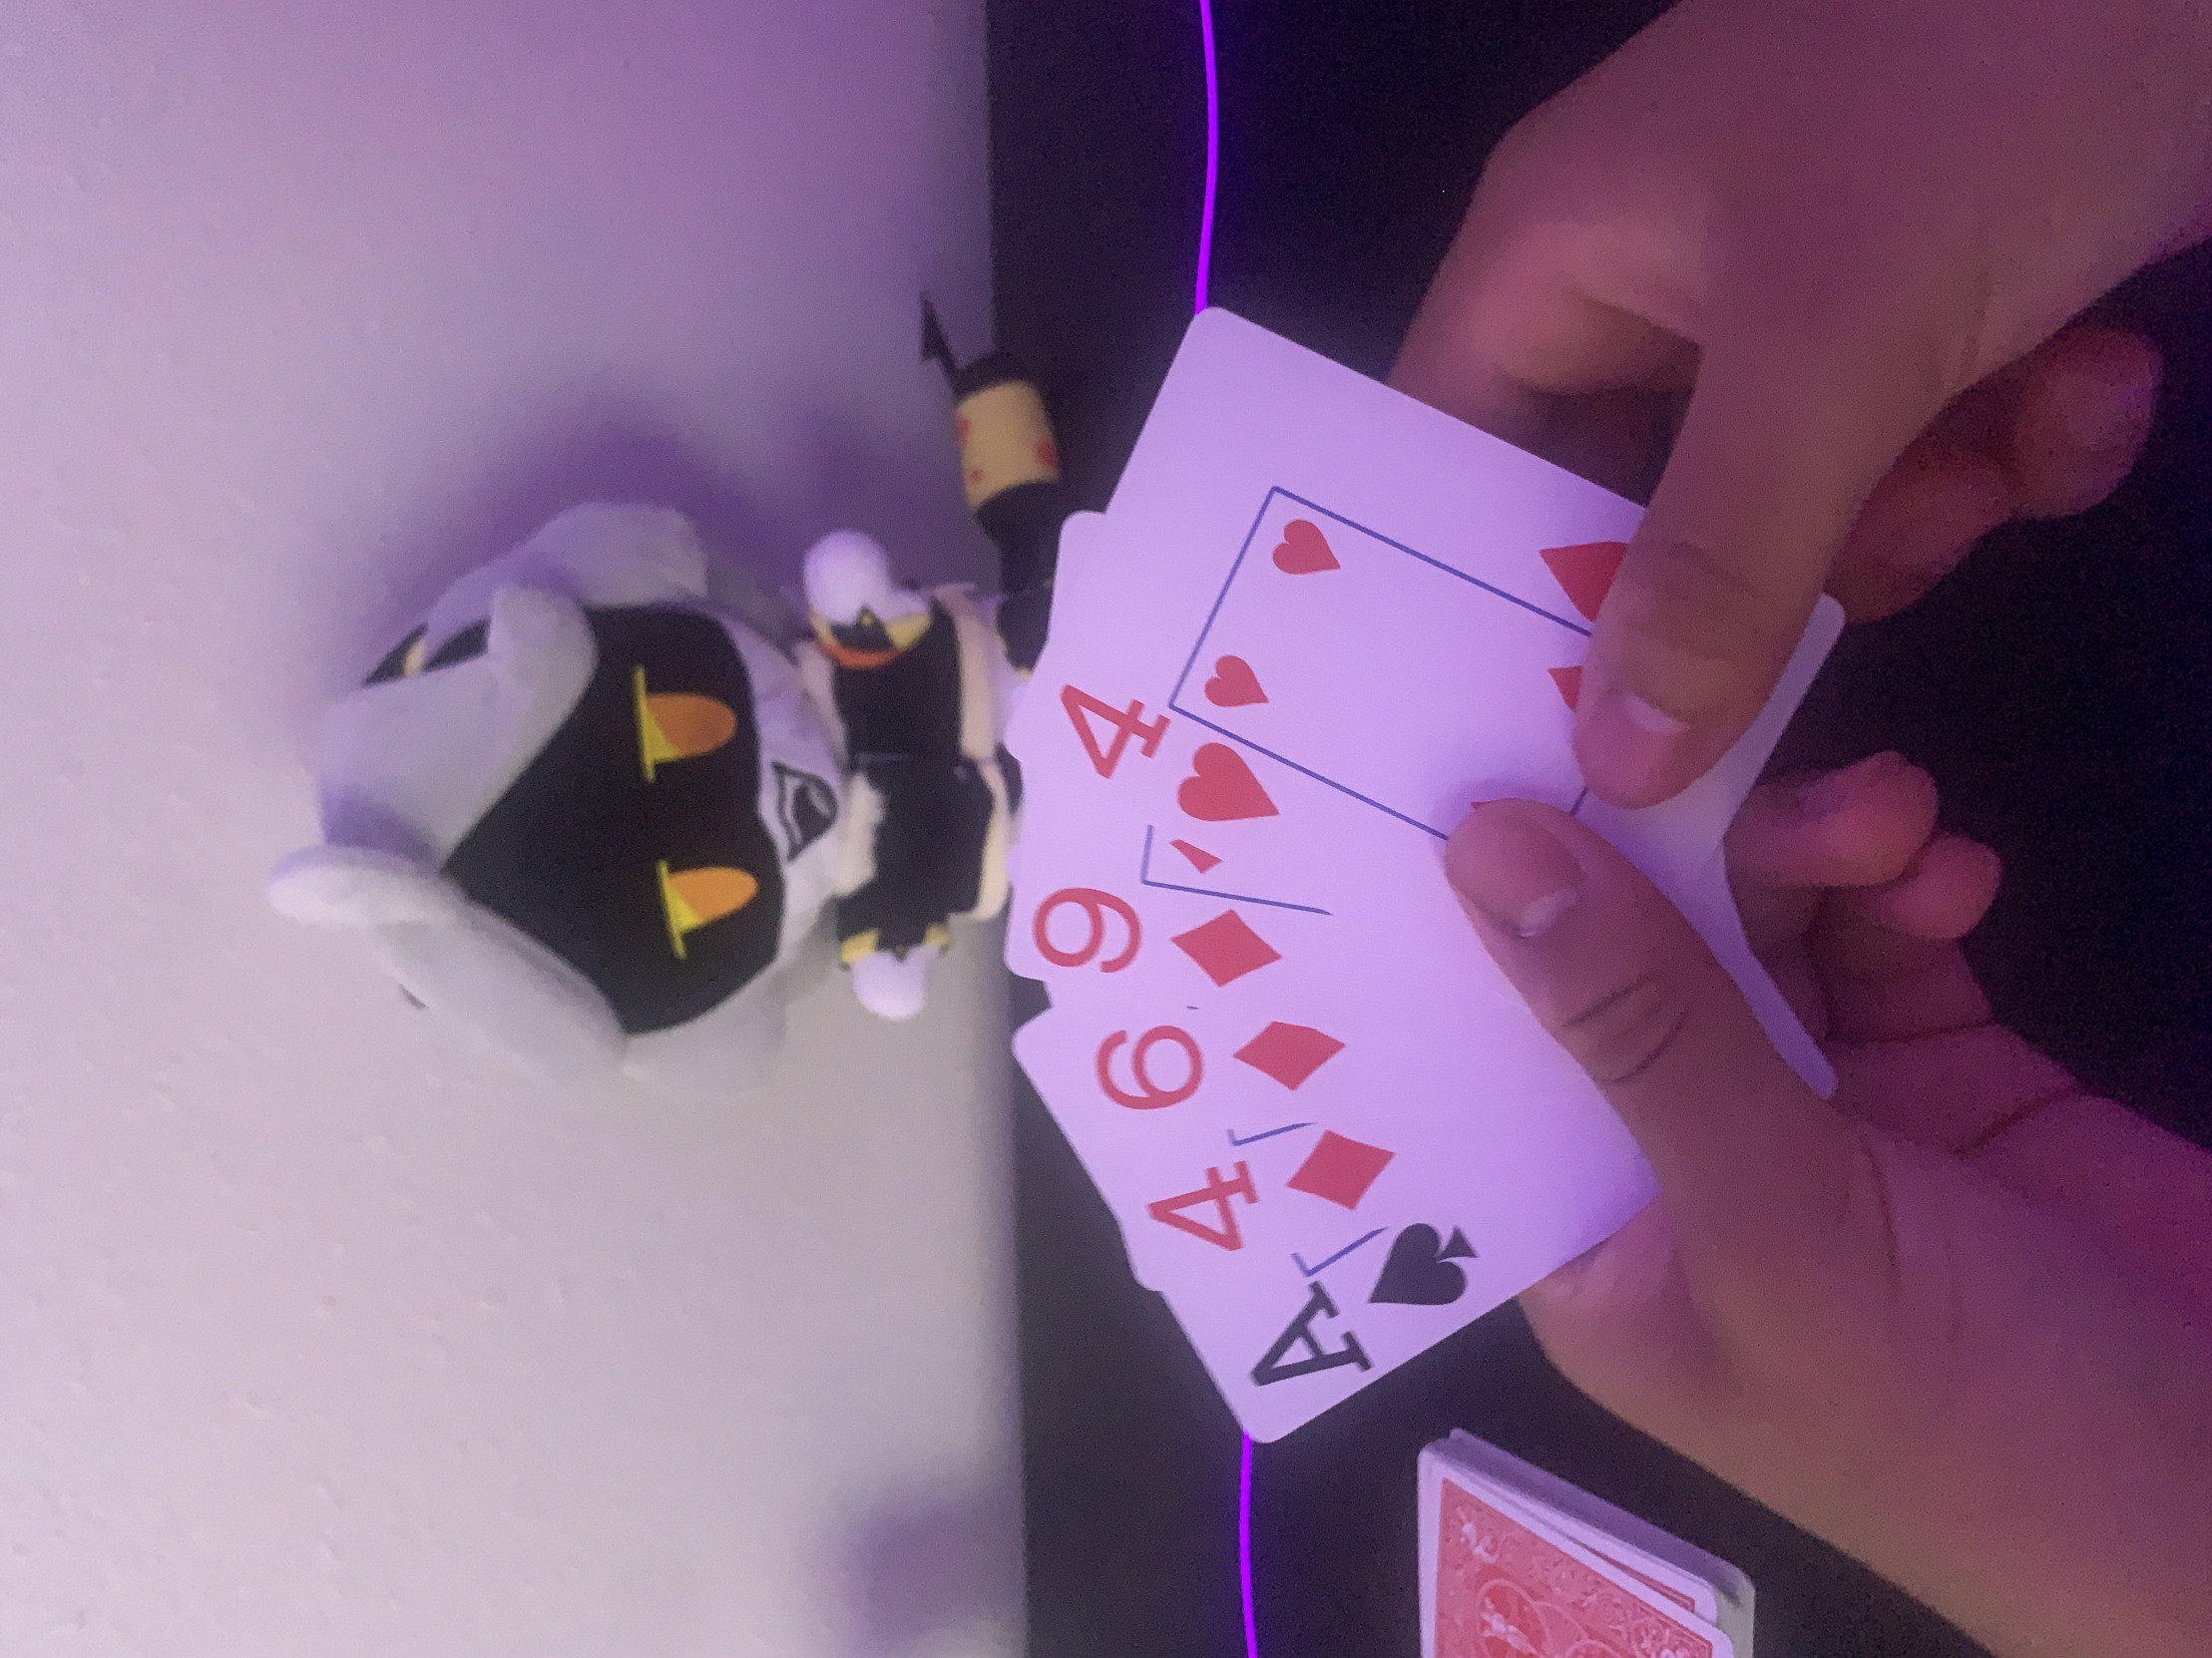 High Quality LaLa playing go fish with V (his dumbass forgot how to play) Blank Meme Template